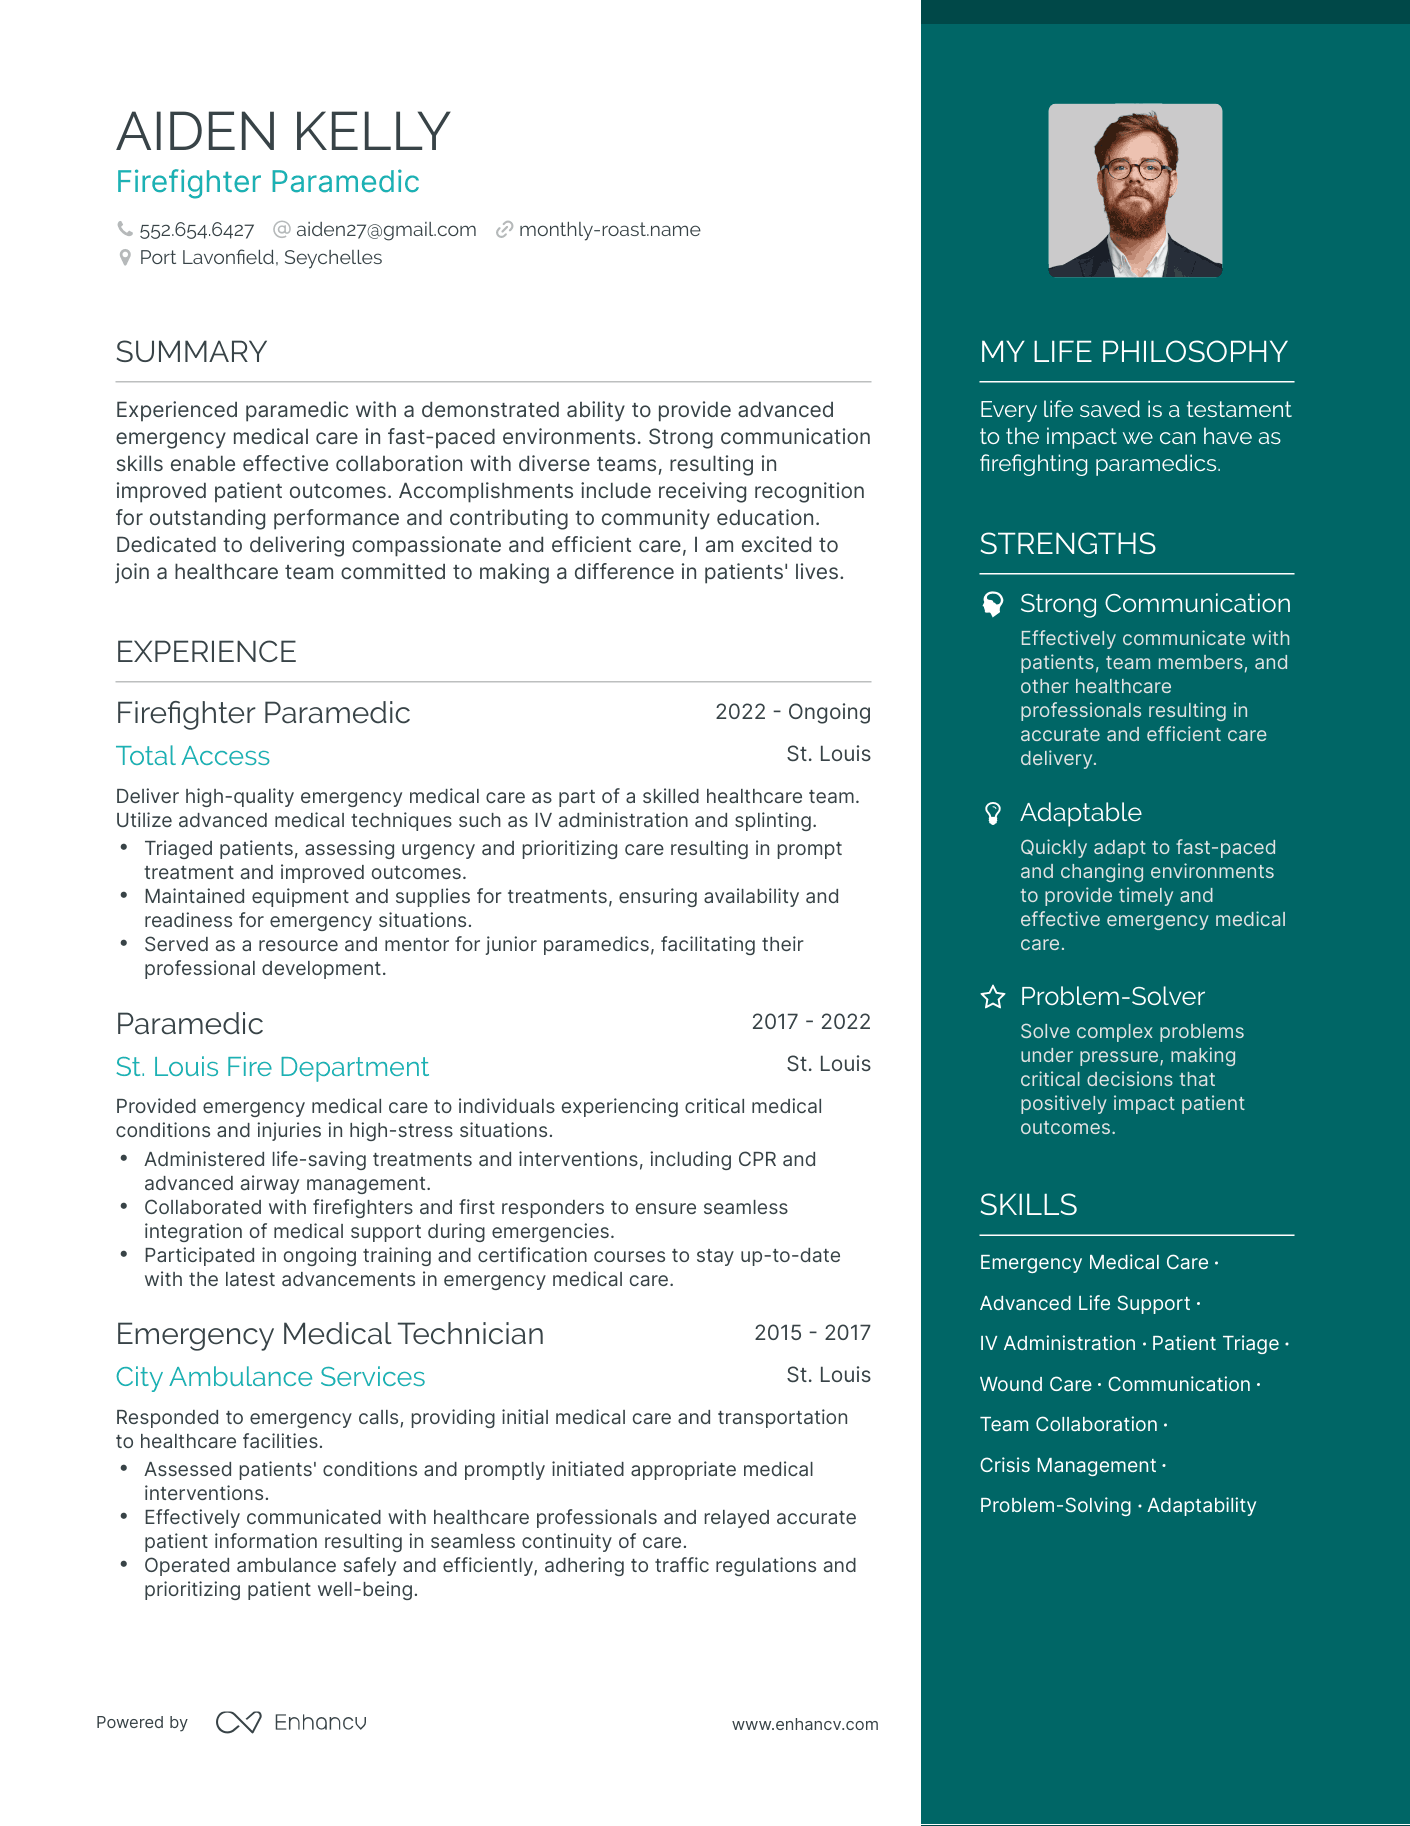 Firefighter Paramedic resume example